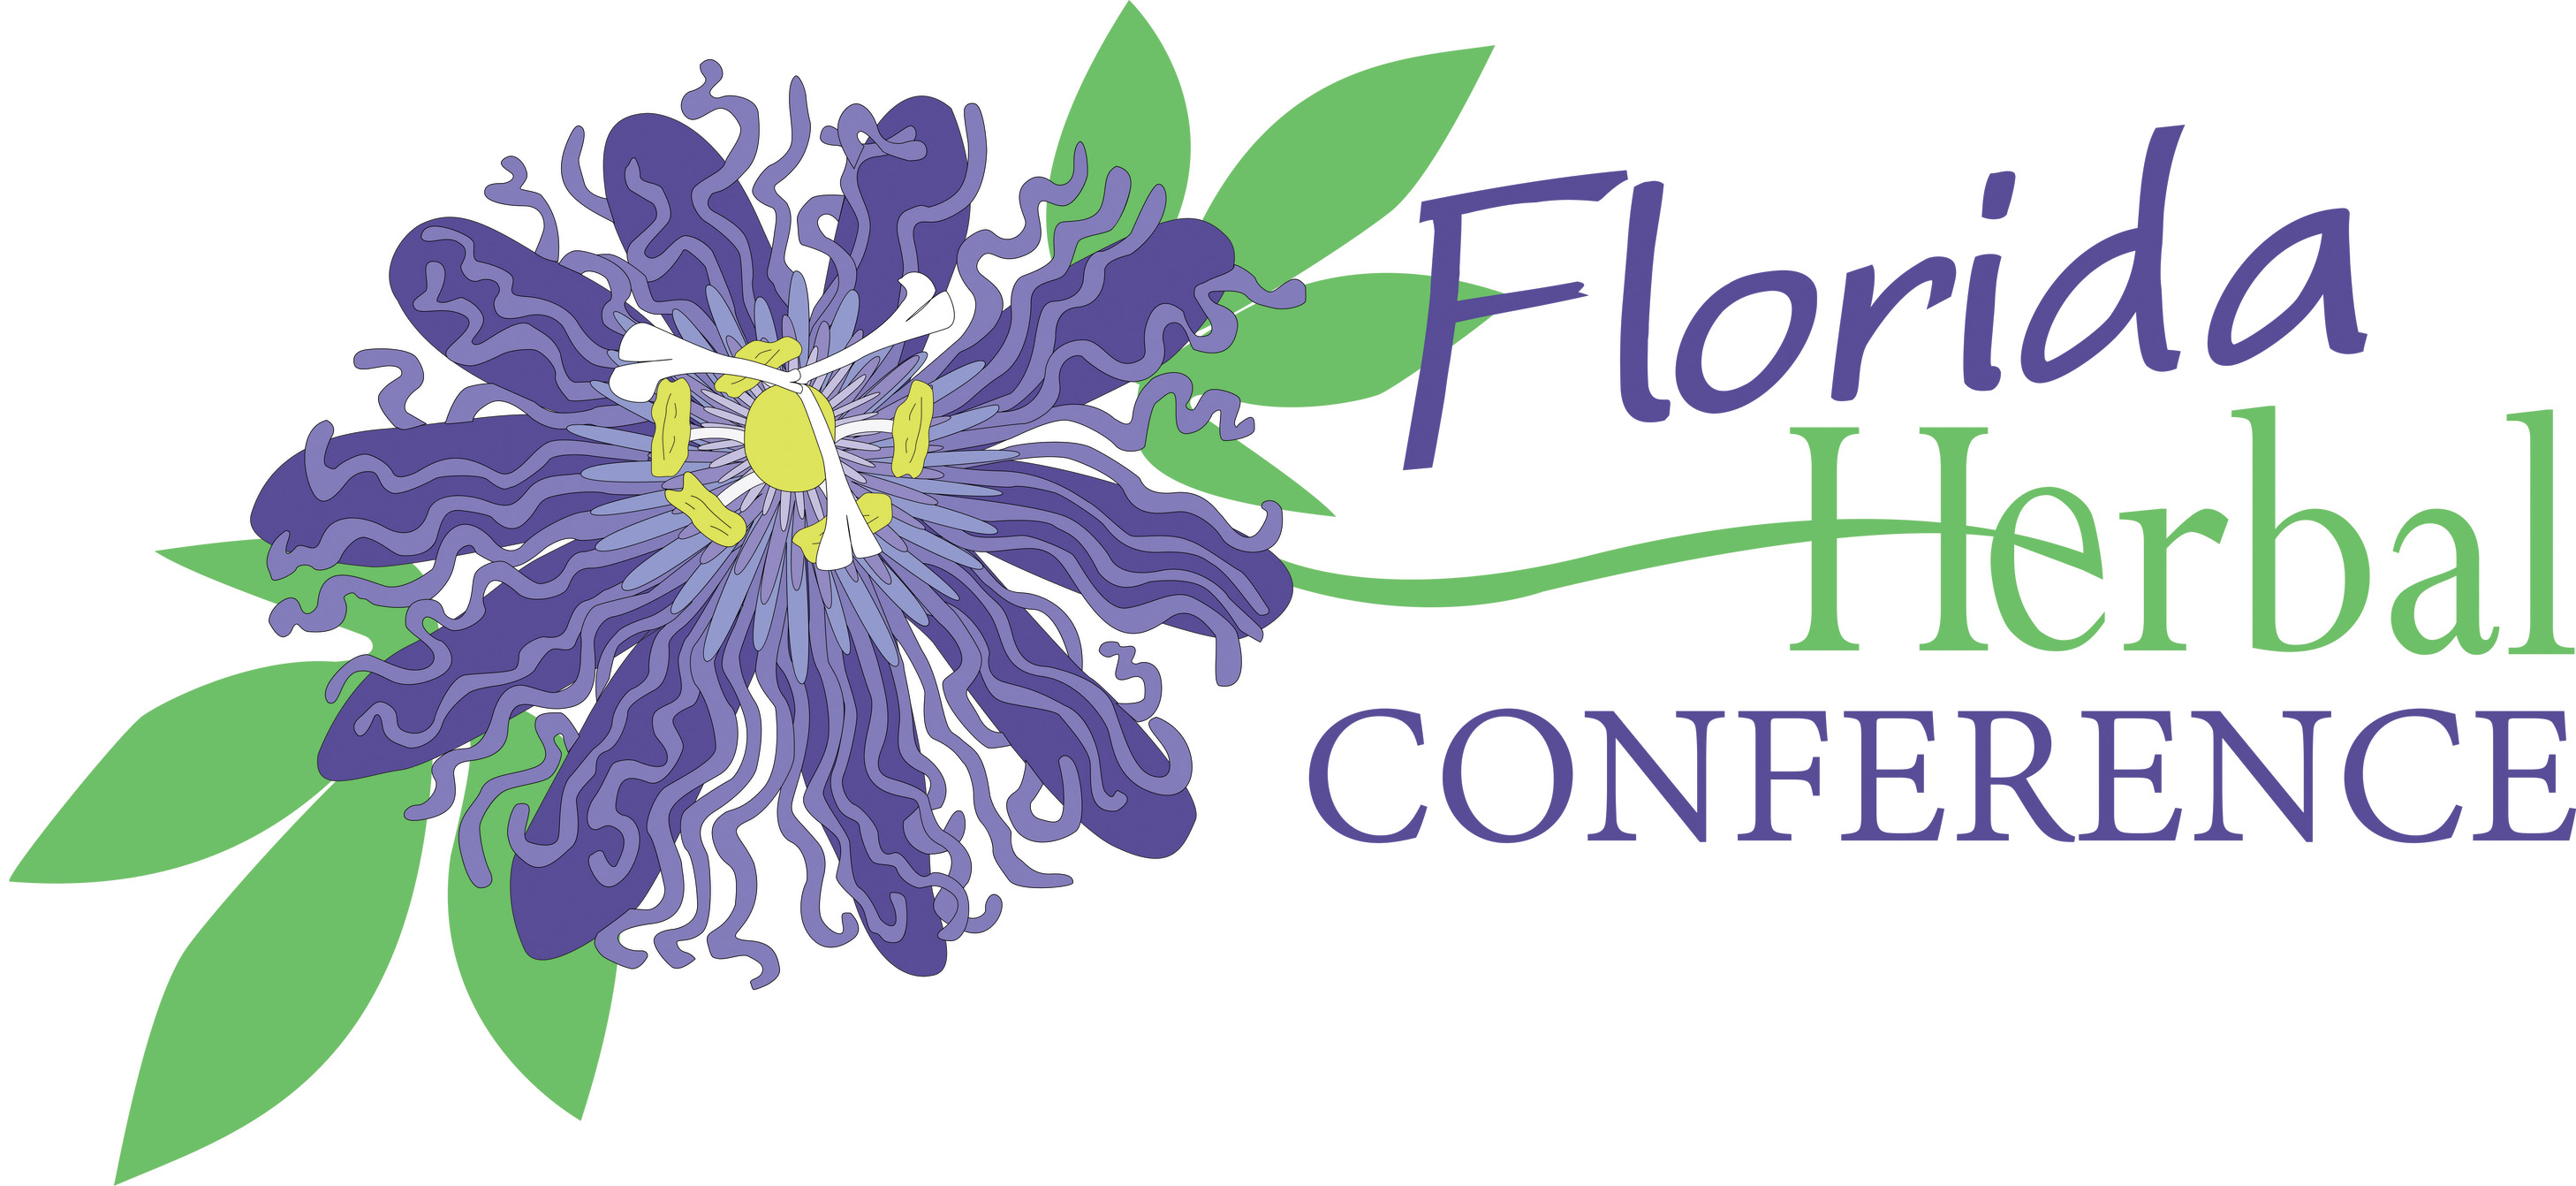 Florida Herbal Conference Returns — Get Your Ticket Early! Central